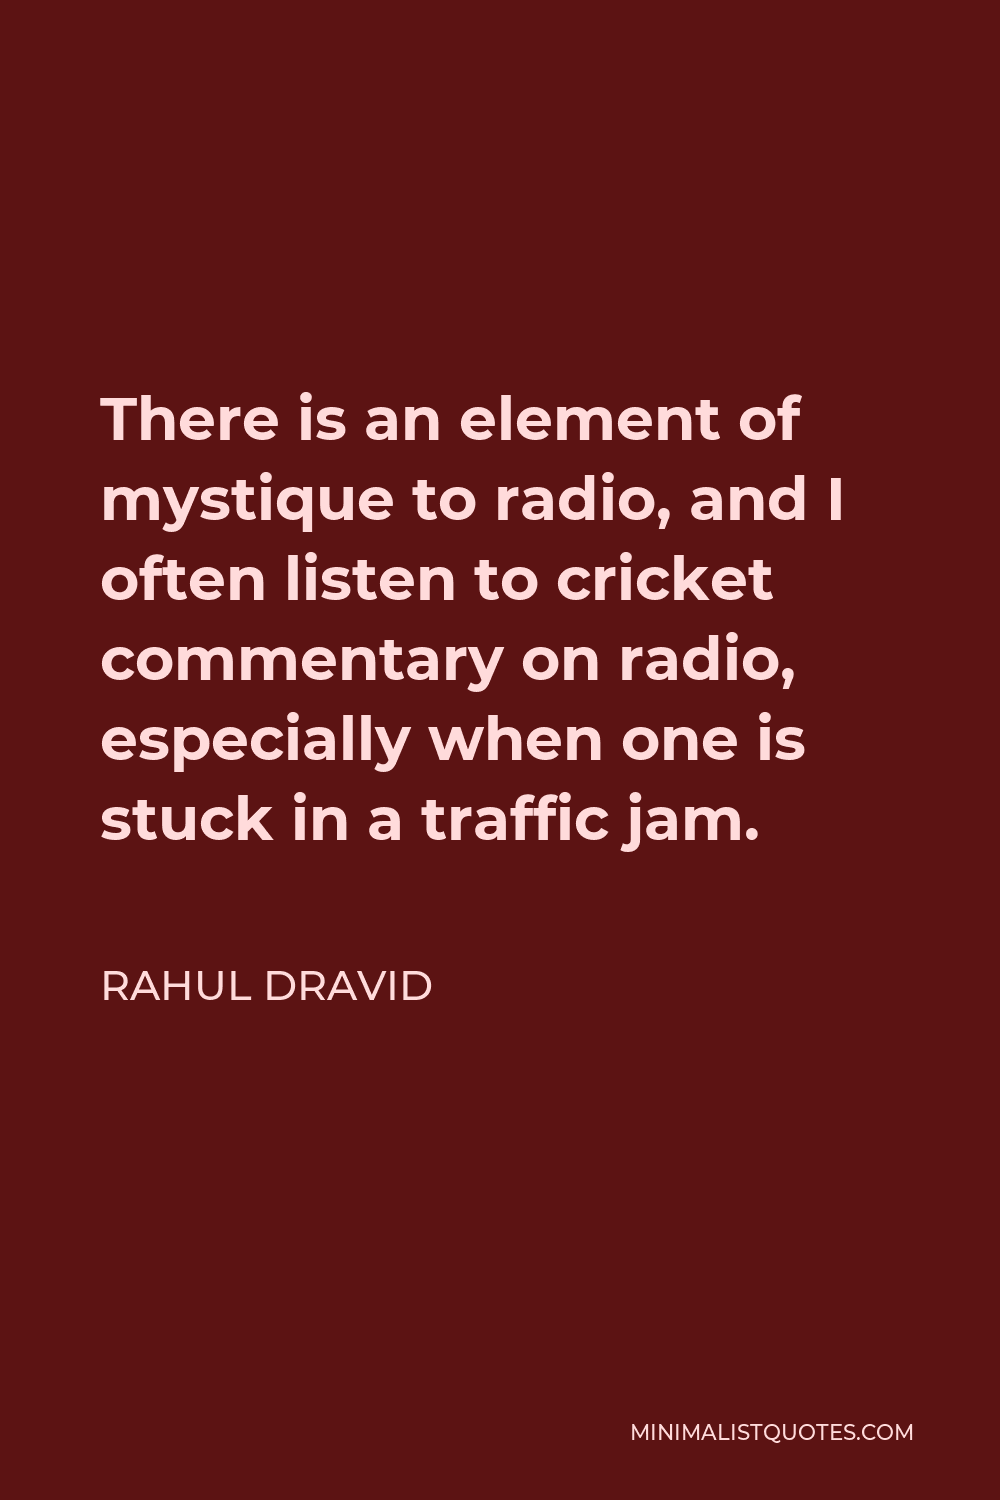 Rahul Dravid Quote - There is an element of mystique to radio, and I often listen to cricket commentary on radio, especially when one is stuck in a traffic jam.